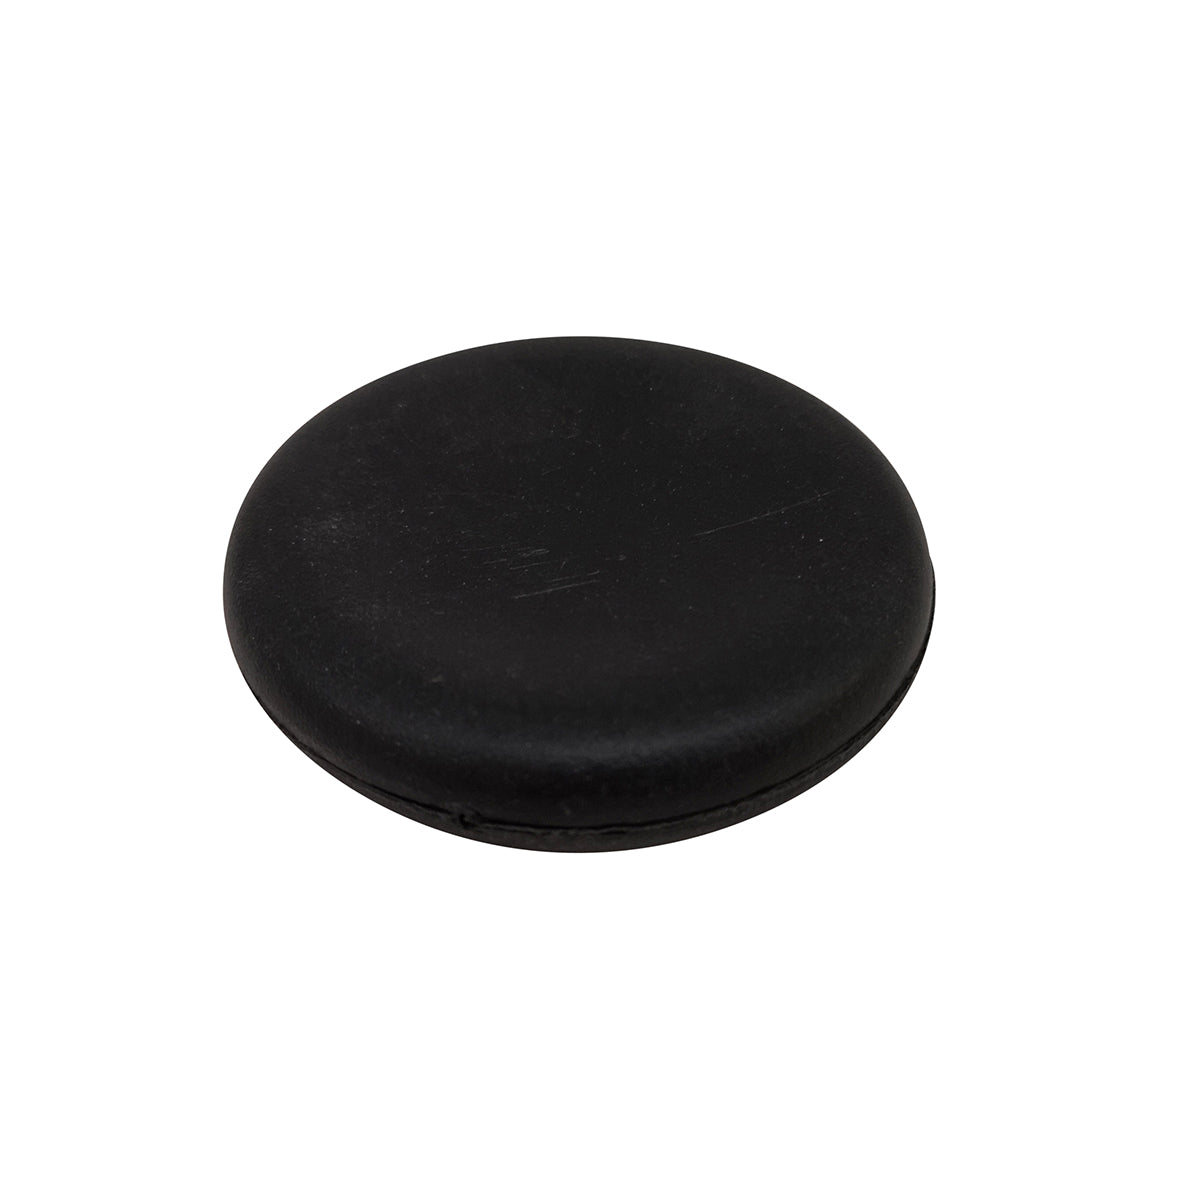 Traditional Garden Games 4 in a Row Buy 1 x Black  Replacement Counter